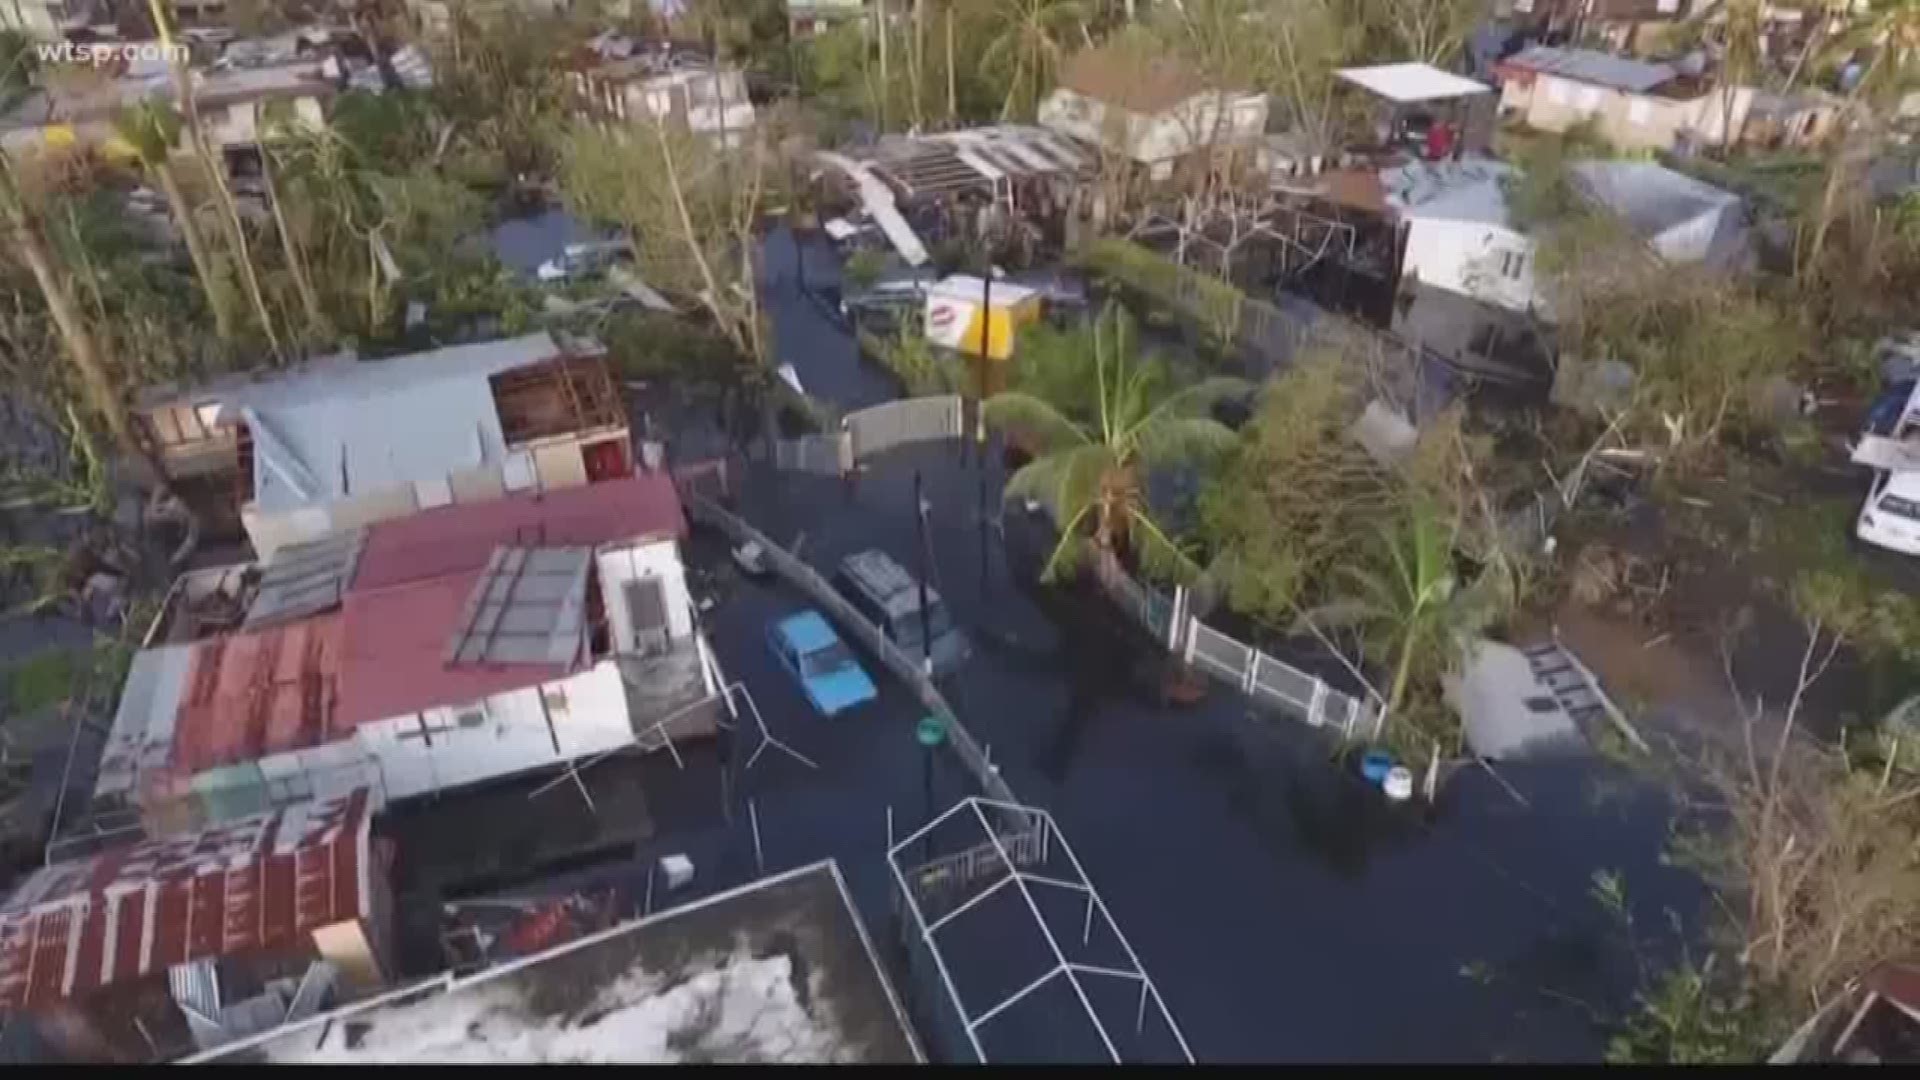 Puerto Rico does not need another tropical system.

"I already know that many places ran out of water, so there’s no water, there are very long lines at the gas stations and the Doppler (radar) out of Puerto Rico, it is not working," Jeannie Calderin said.

Calderin is the president and founder of Somos Puerto Rico Tampa. She's made it her mission to help families who relocated to the Tampa Bay area after Hurricane Maria.